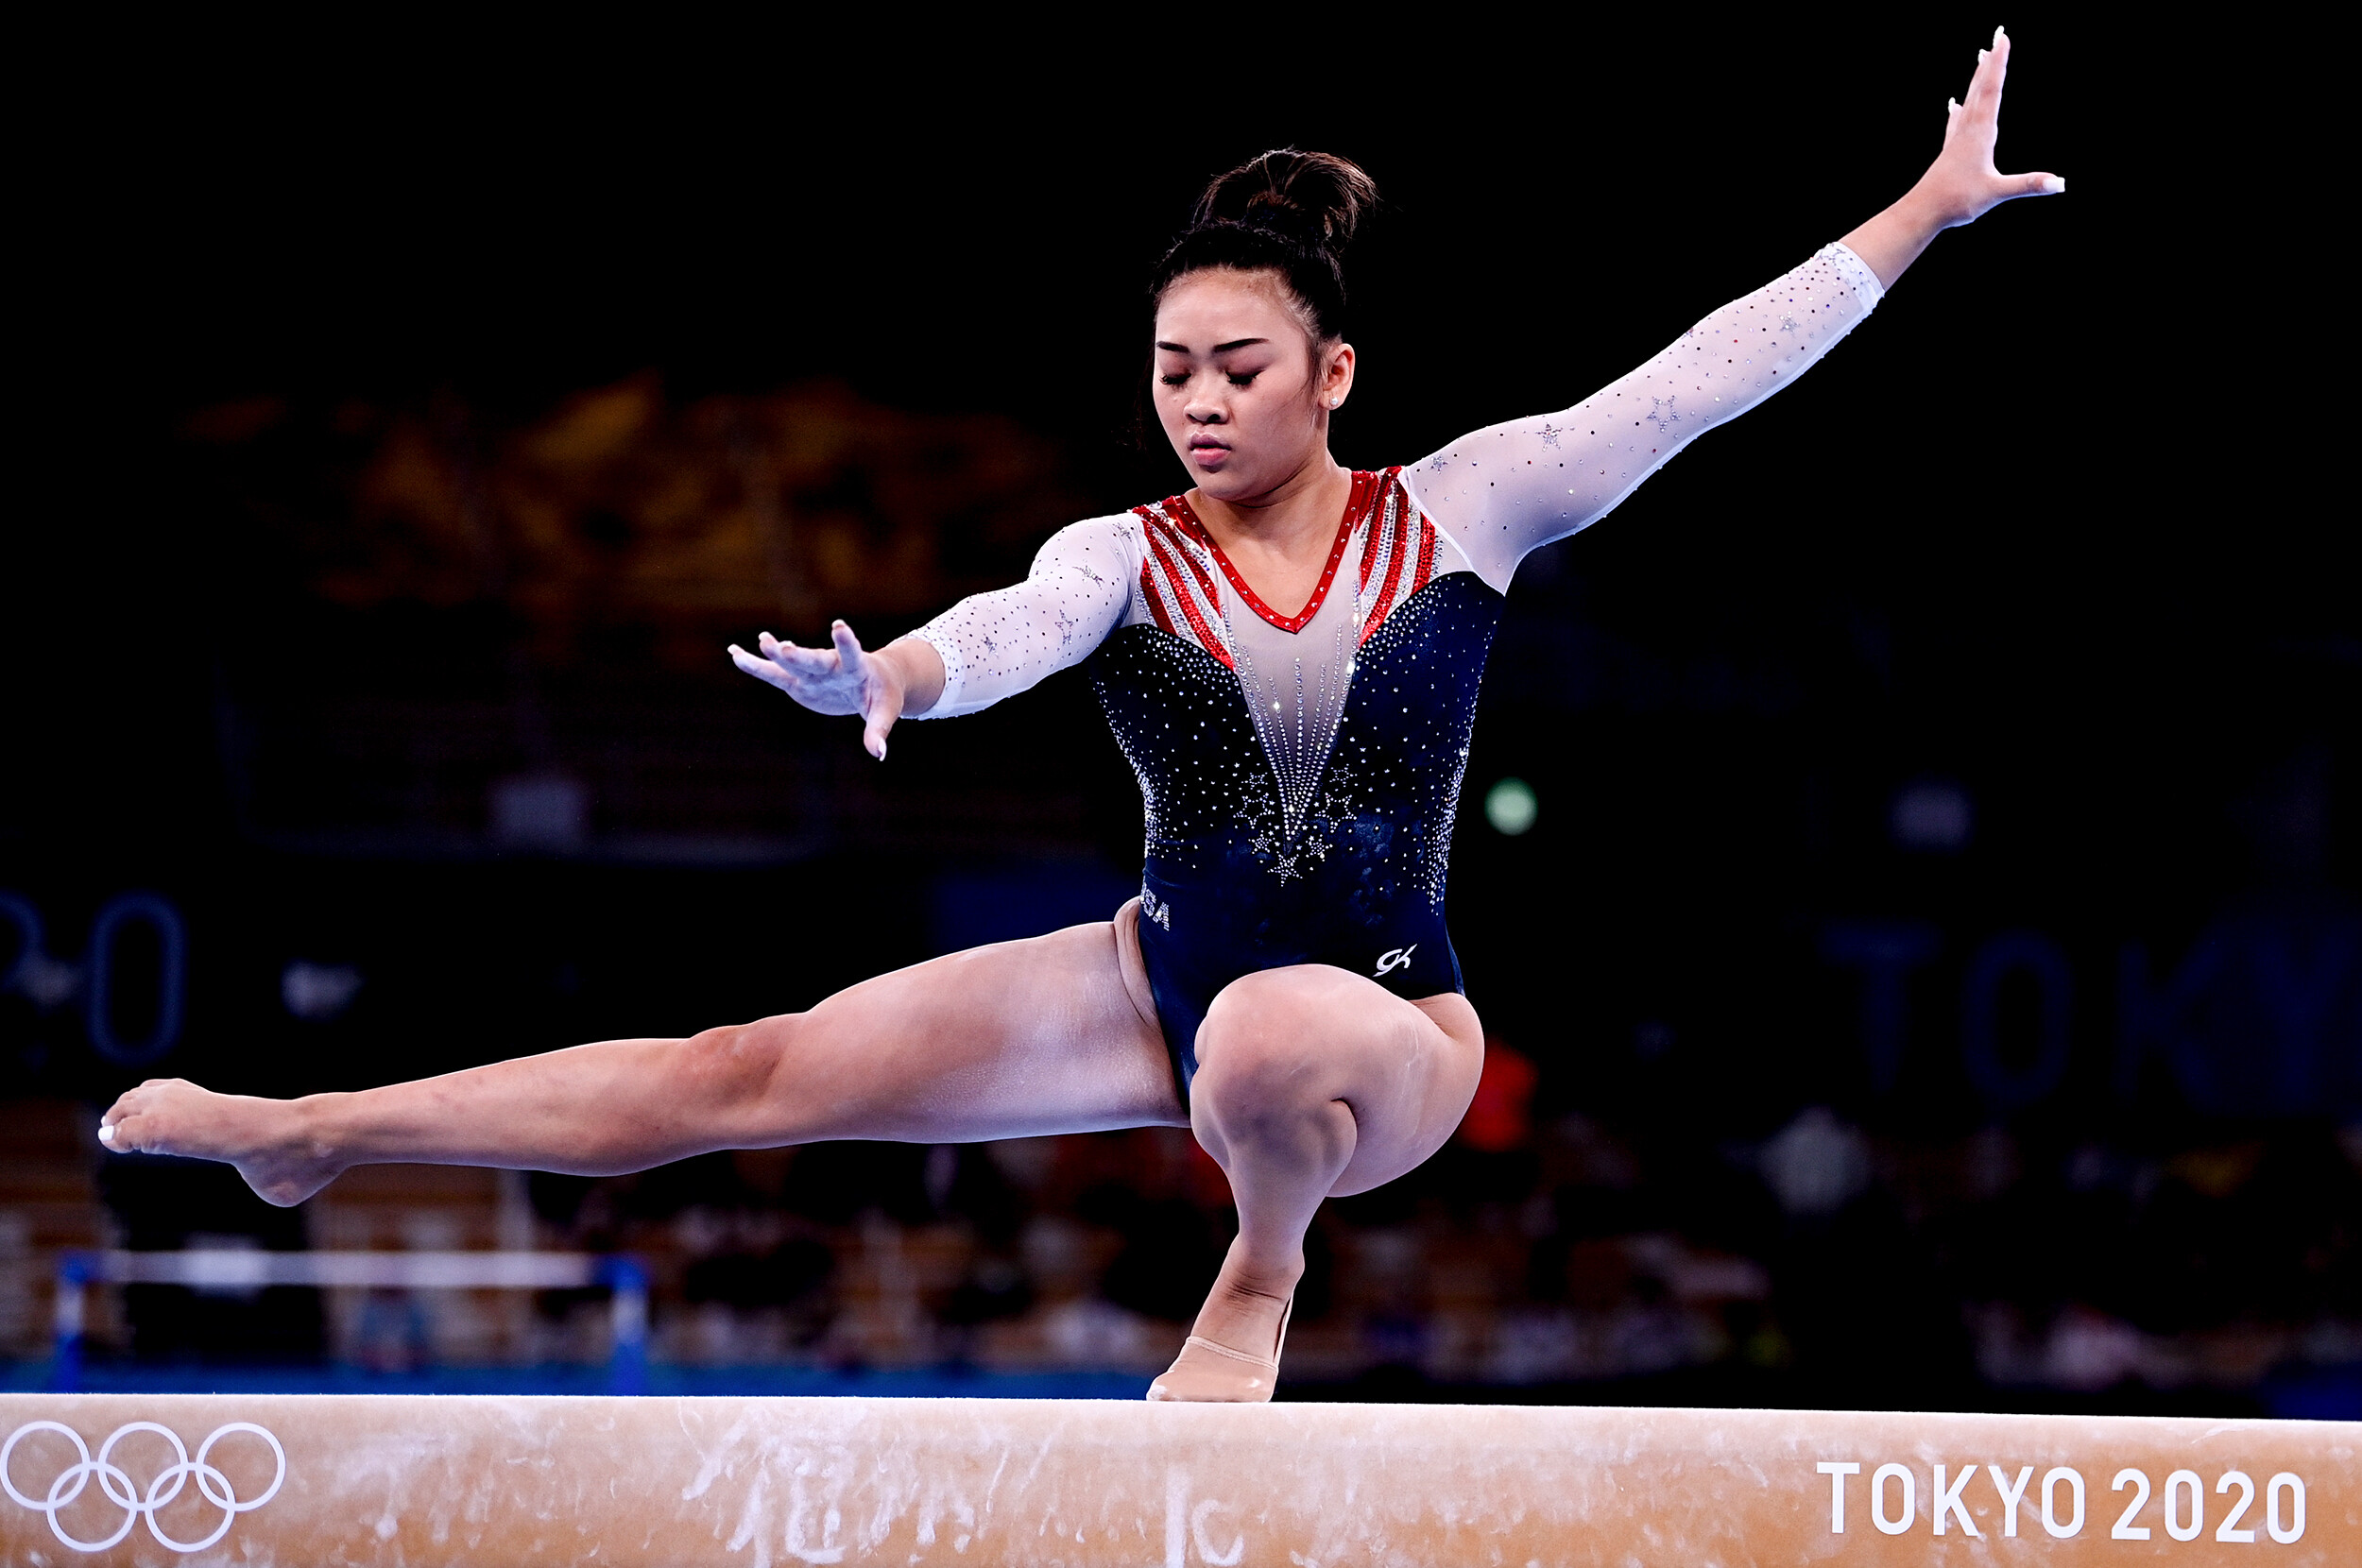 Sunisa Lee: Tokyo 2020 Summer Olympics, She made her junior elite debut at the 2016 U.S. Classic. 2500x1660 HD Wallpaper.